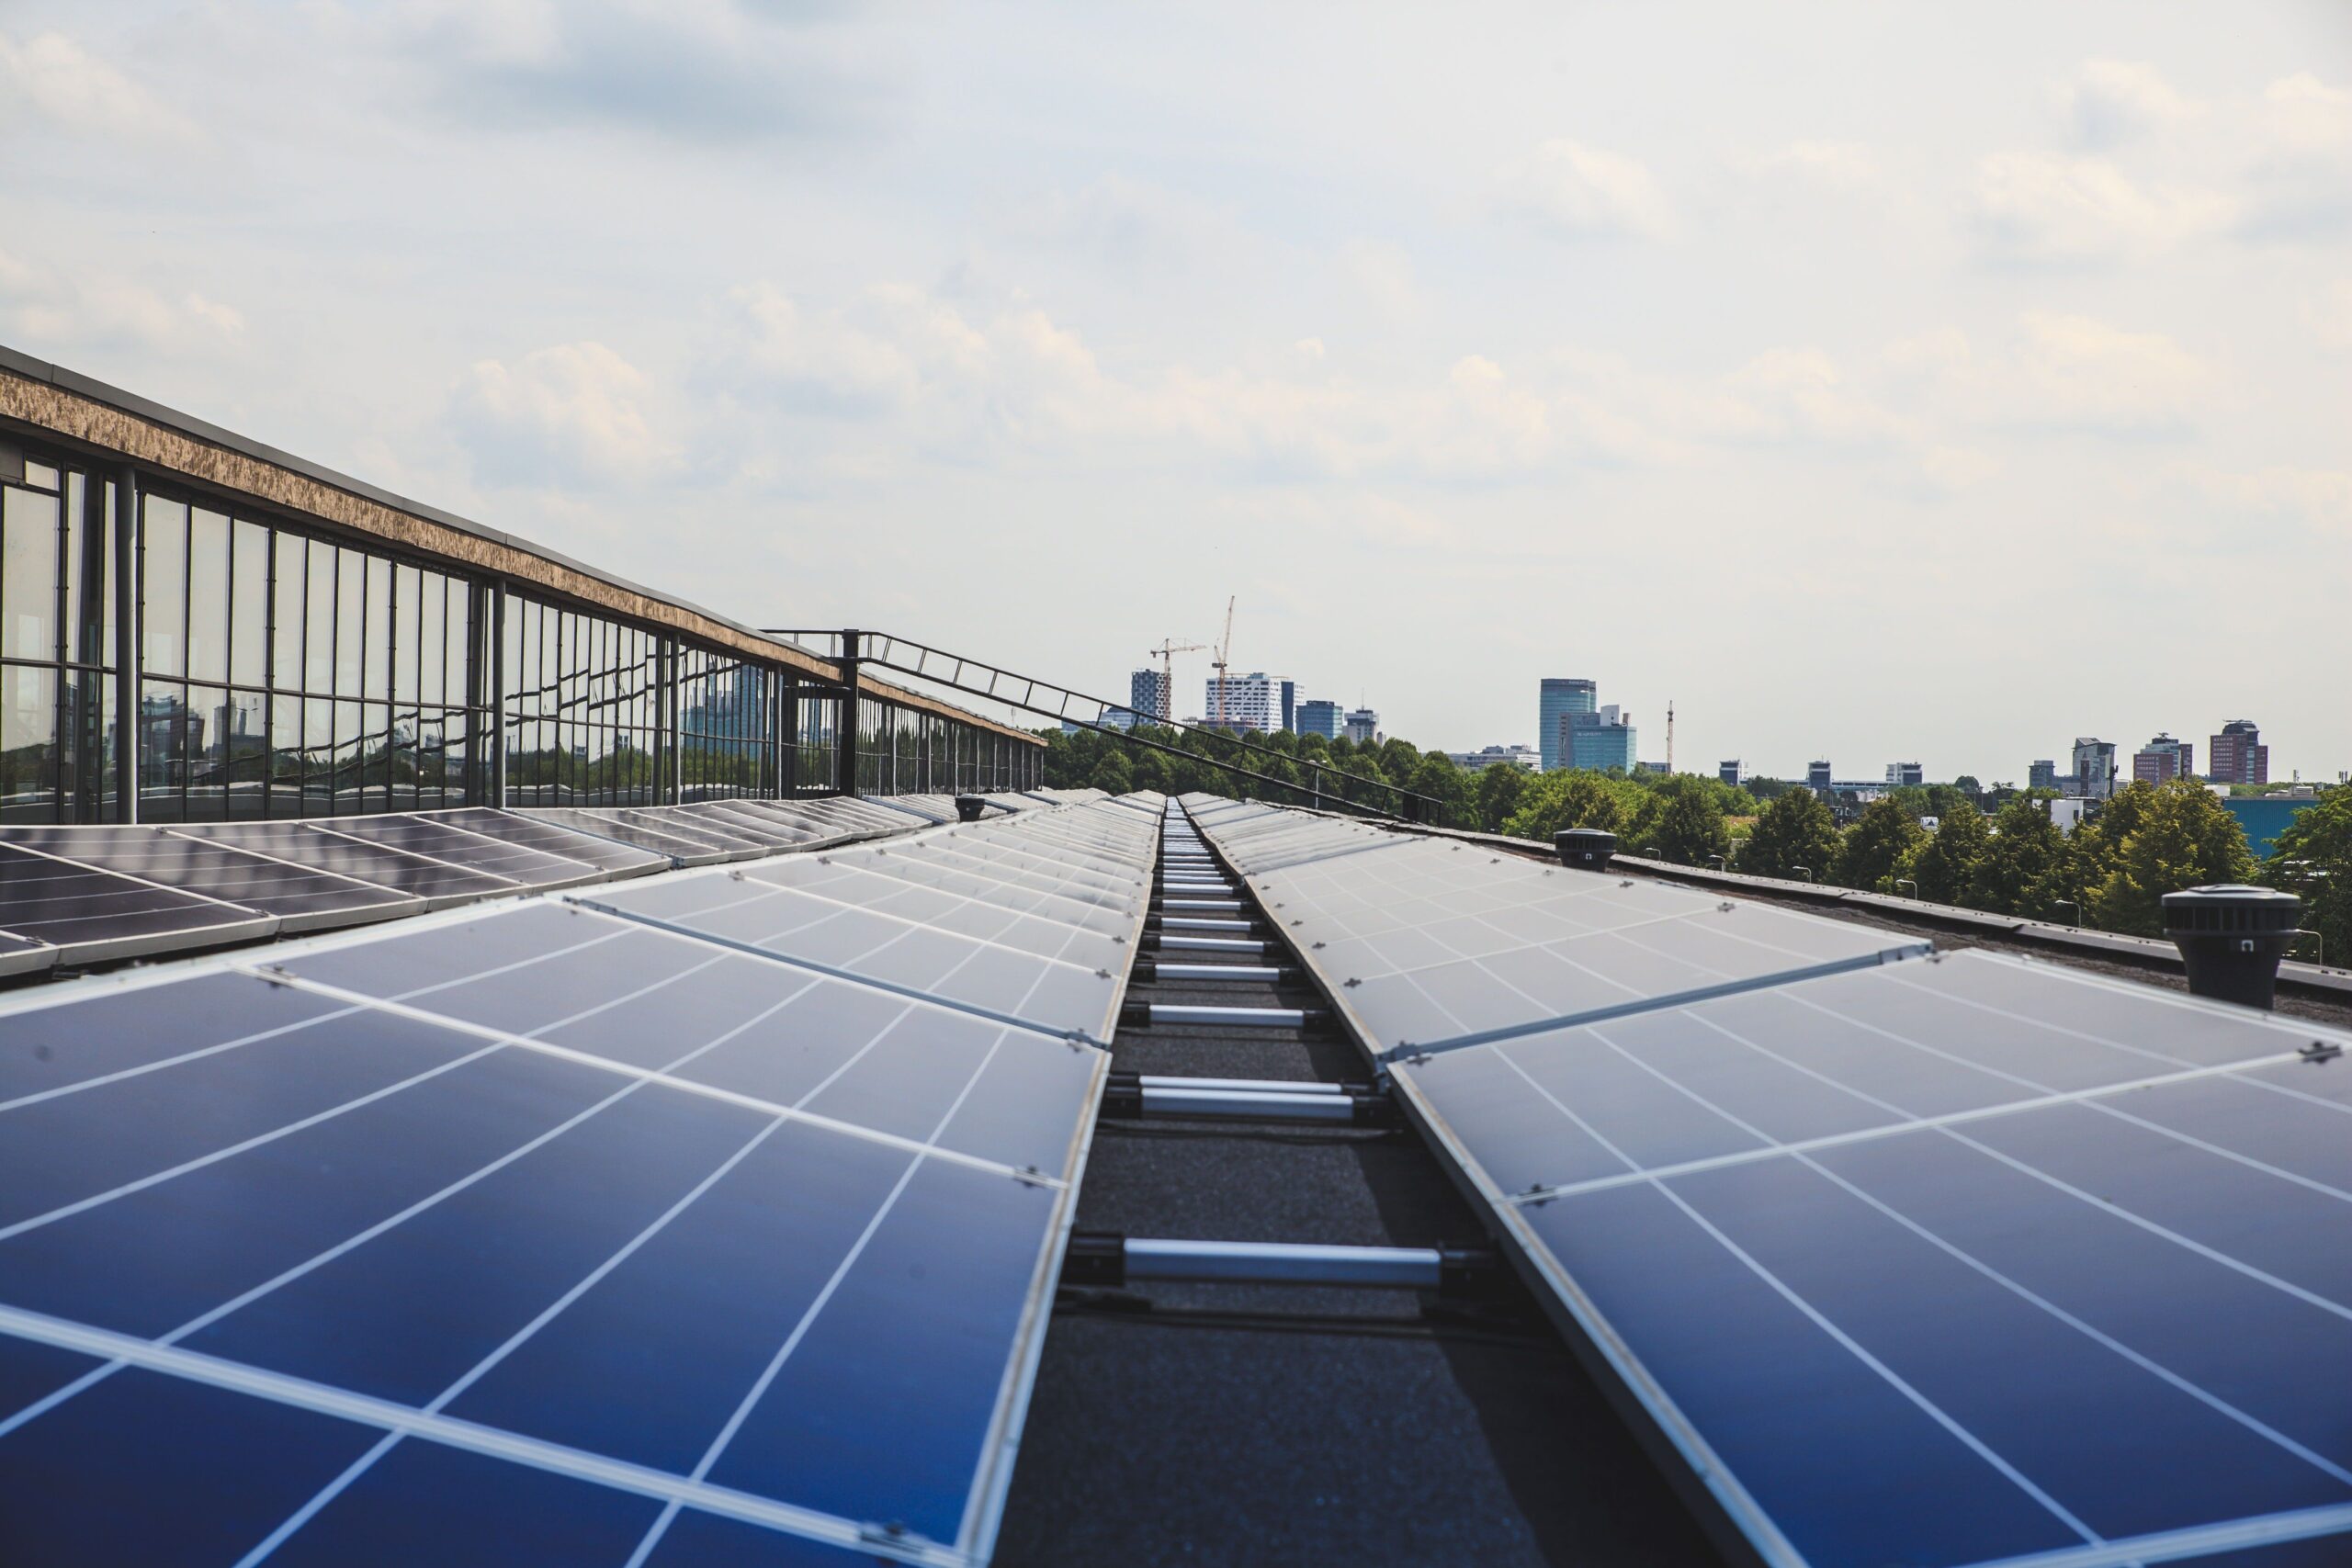 Powering the UK with solar technology